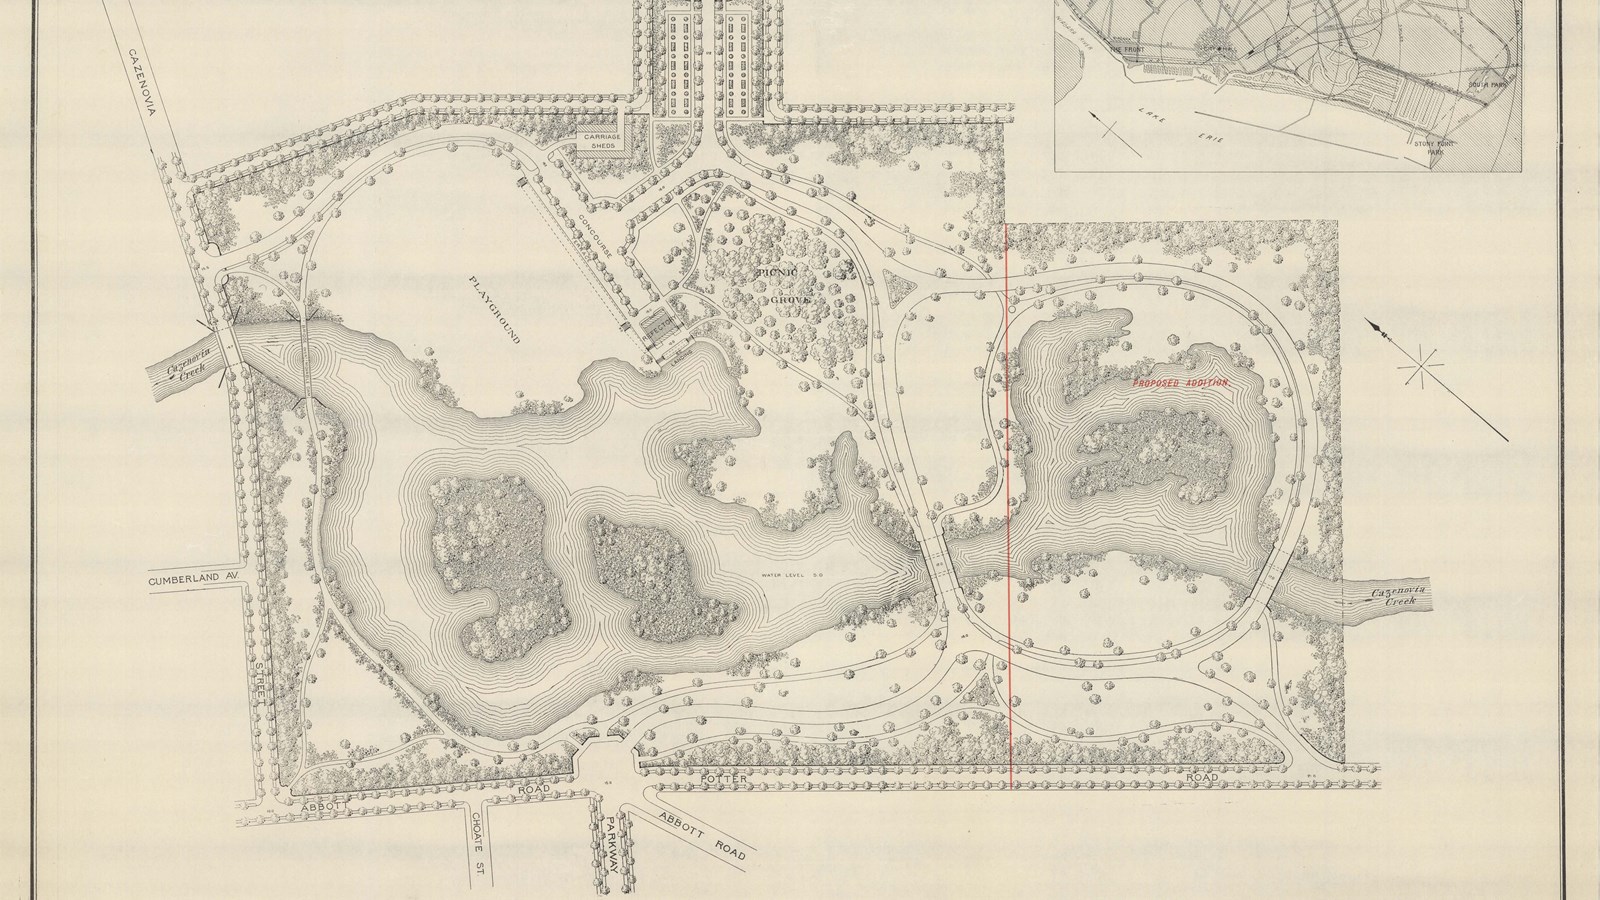 Plan of park with trees lining edges and curving paths, open areas, and water spread out